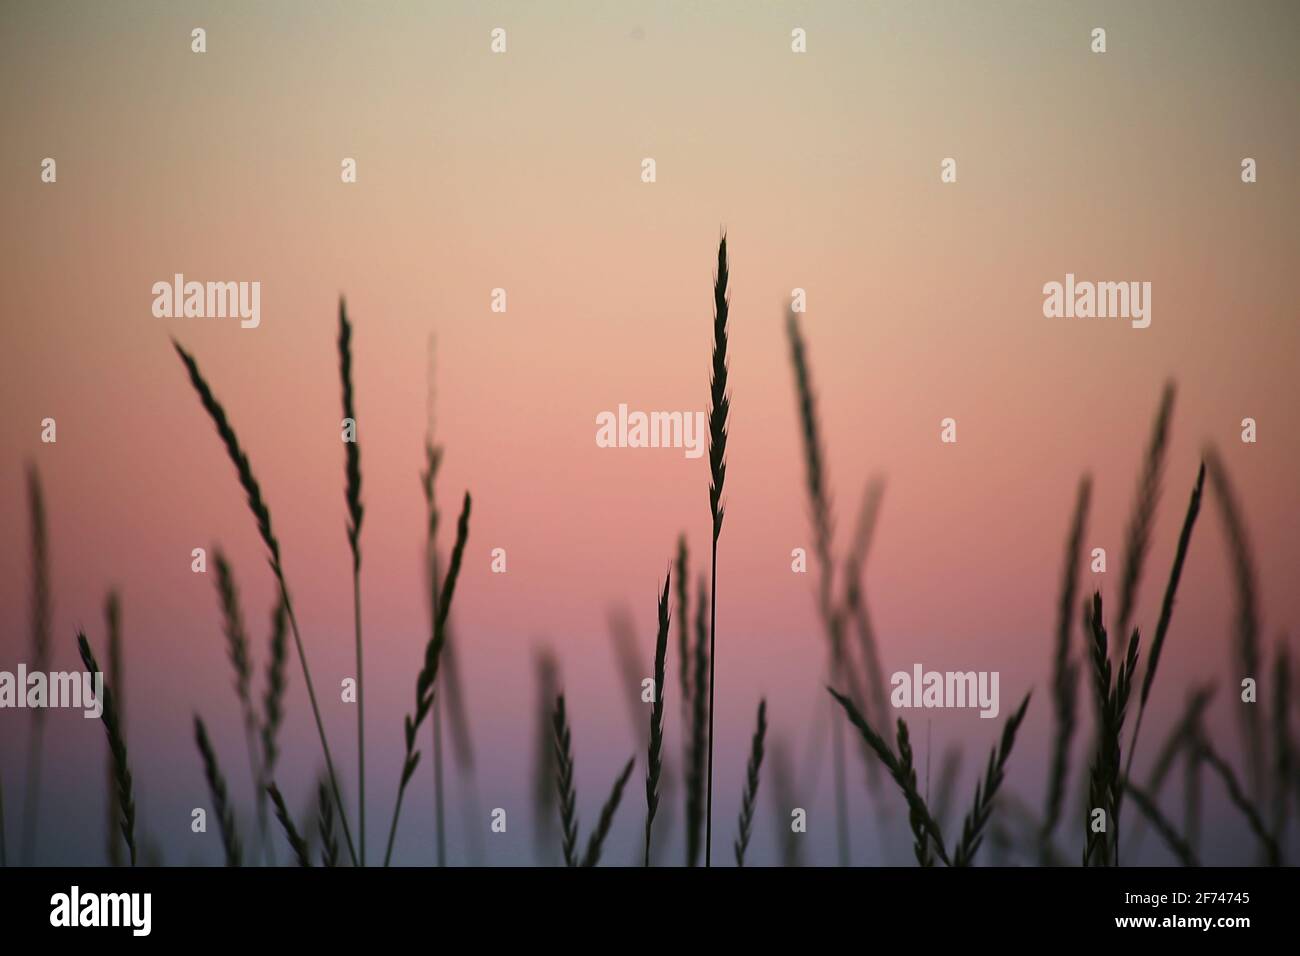 Silhouette close up view of wheatgrass at dusk with purple pink glow sky background relax soft focus Stock Photo